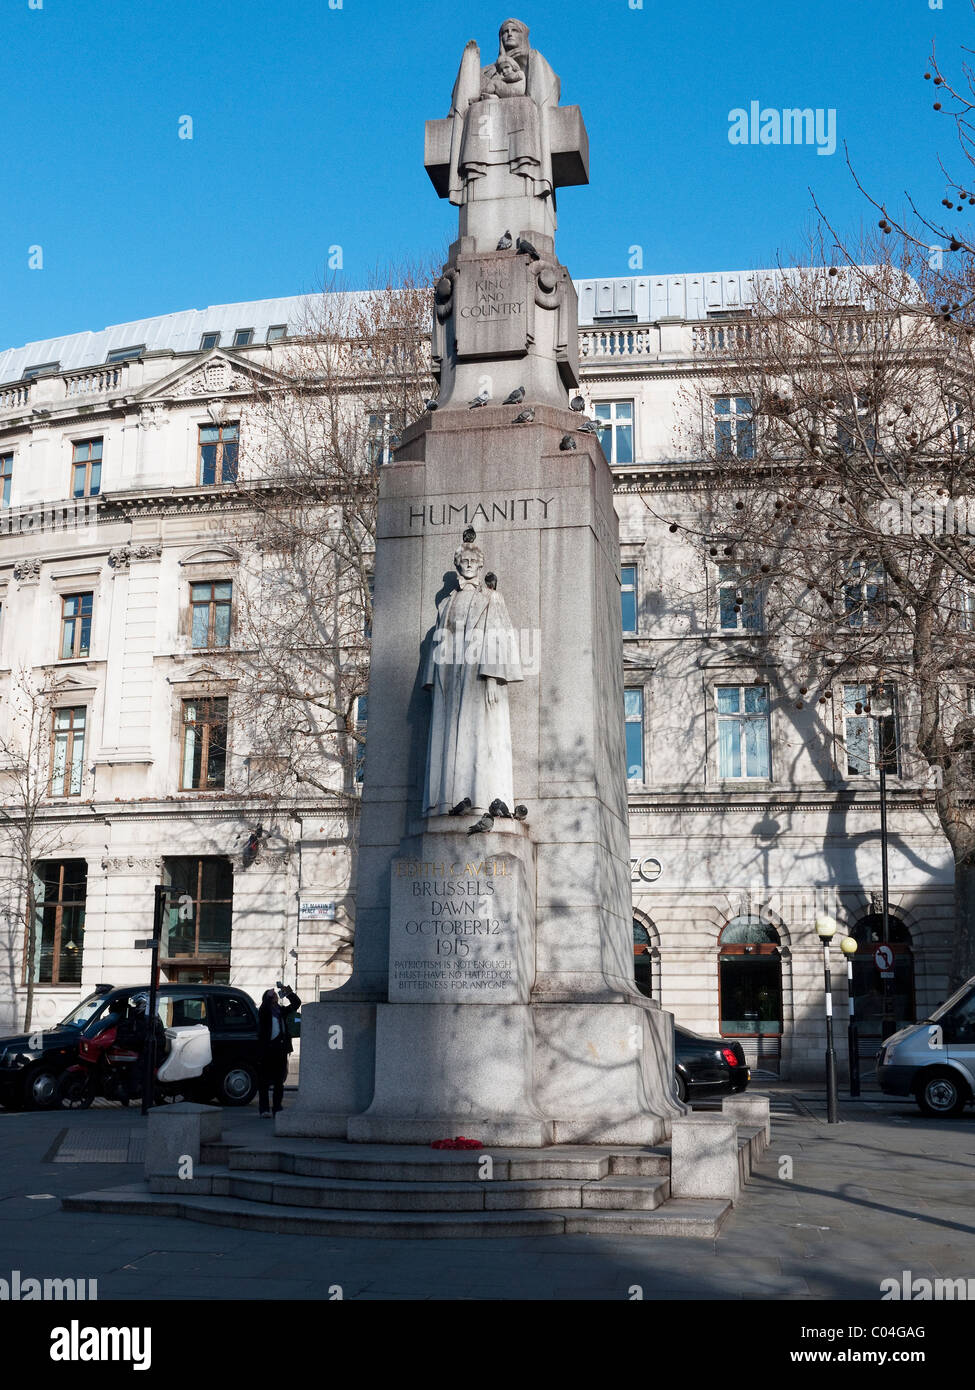 Statue of Edith Cavell In Londons Charing Cross Road Stock Photo